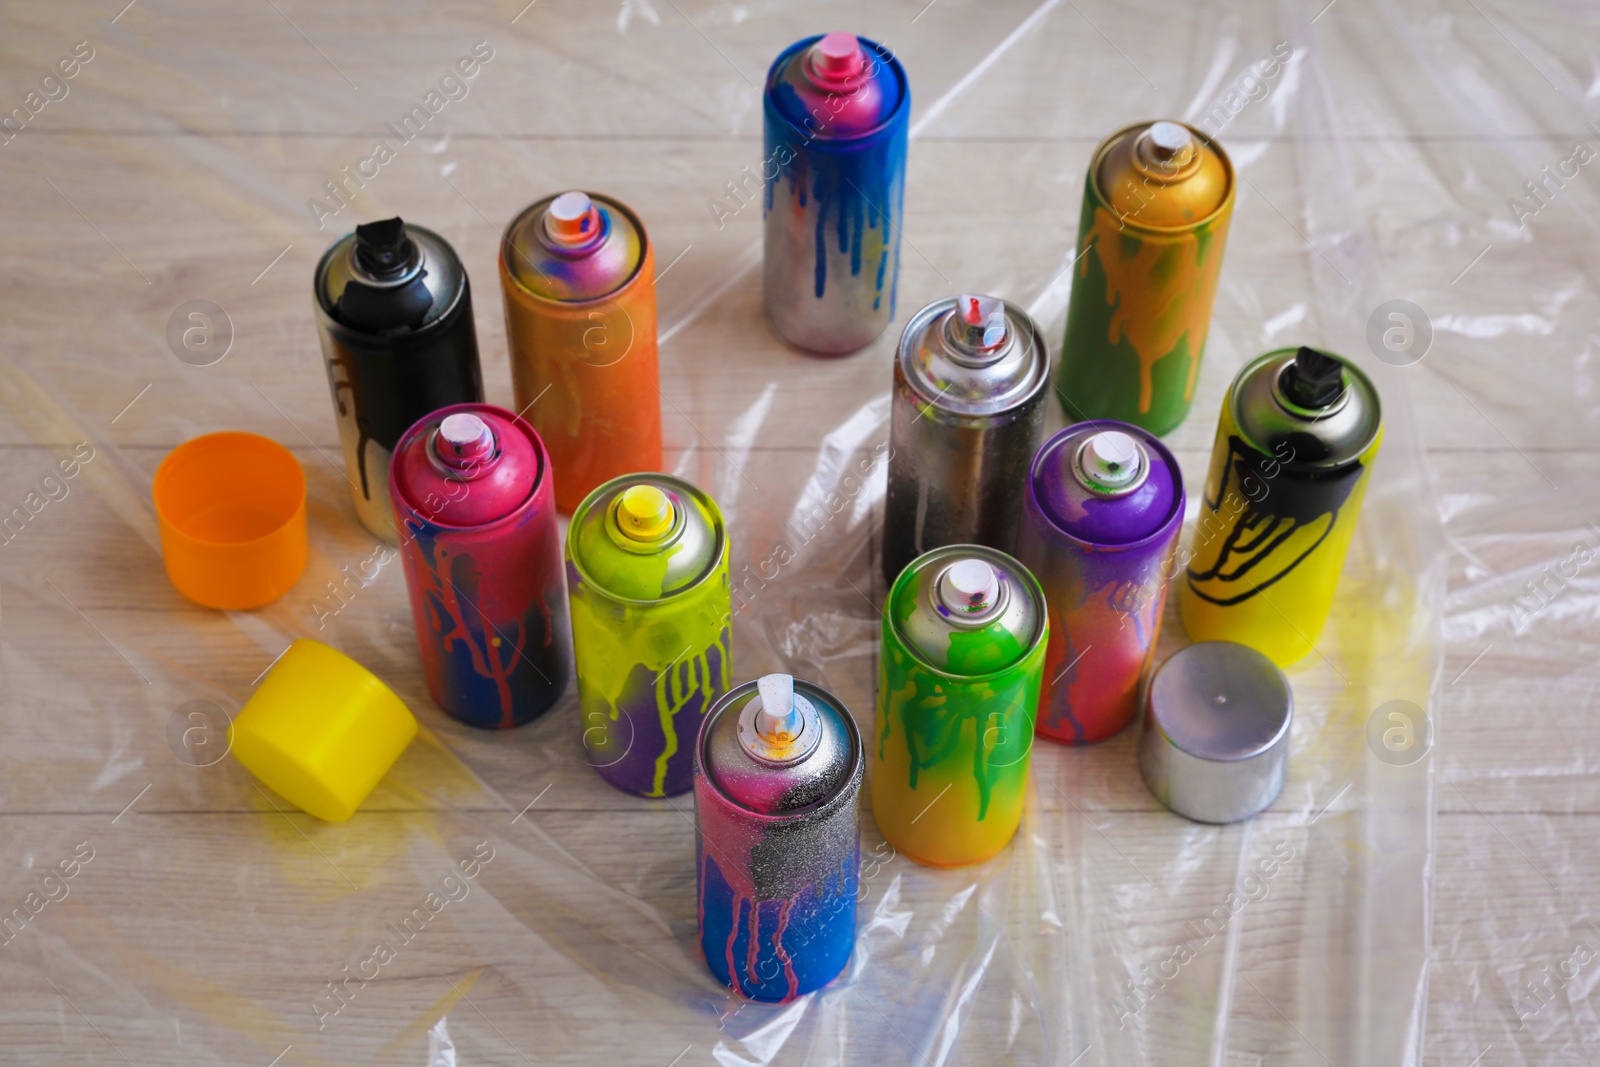 Photo of Used cans of spray paints on floor indoors. Graffiti supplies